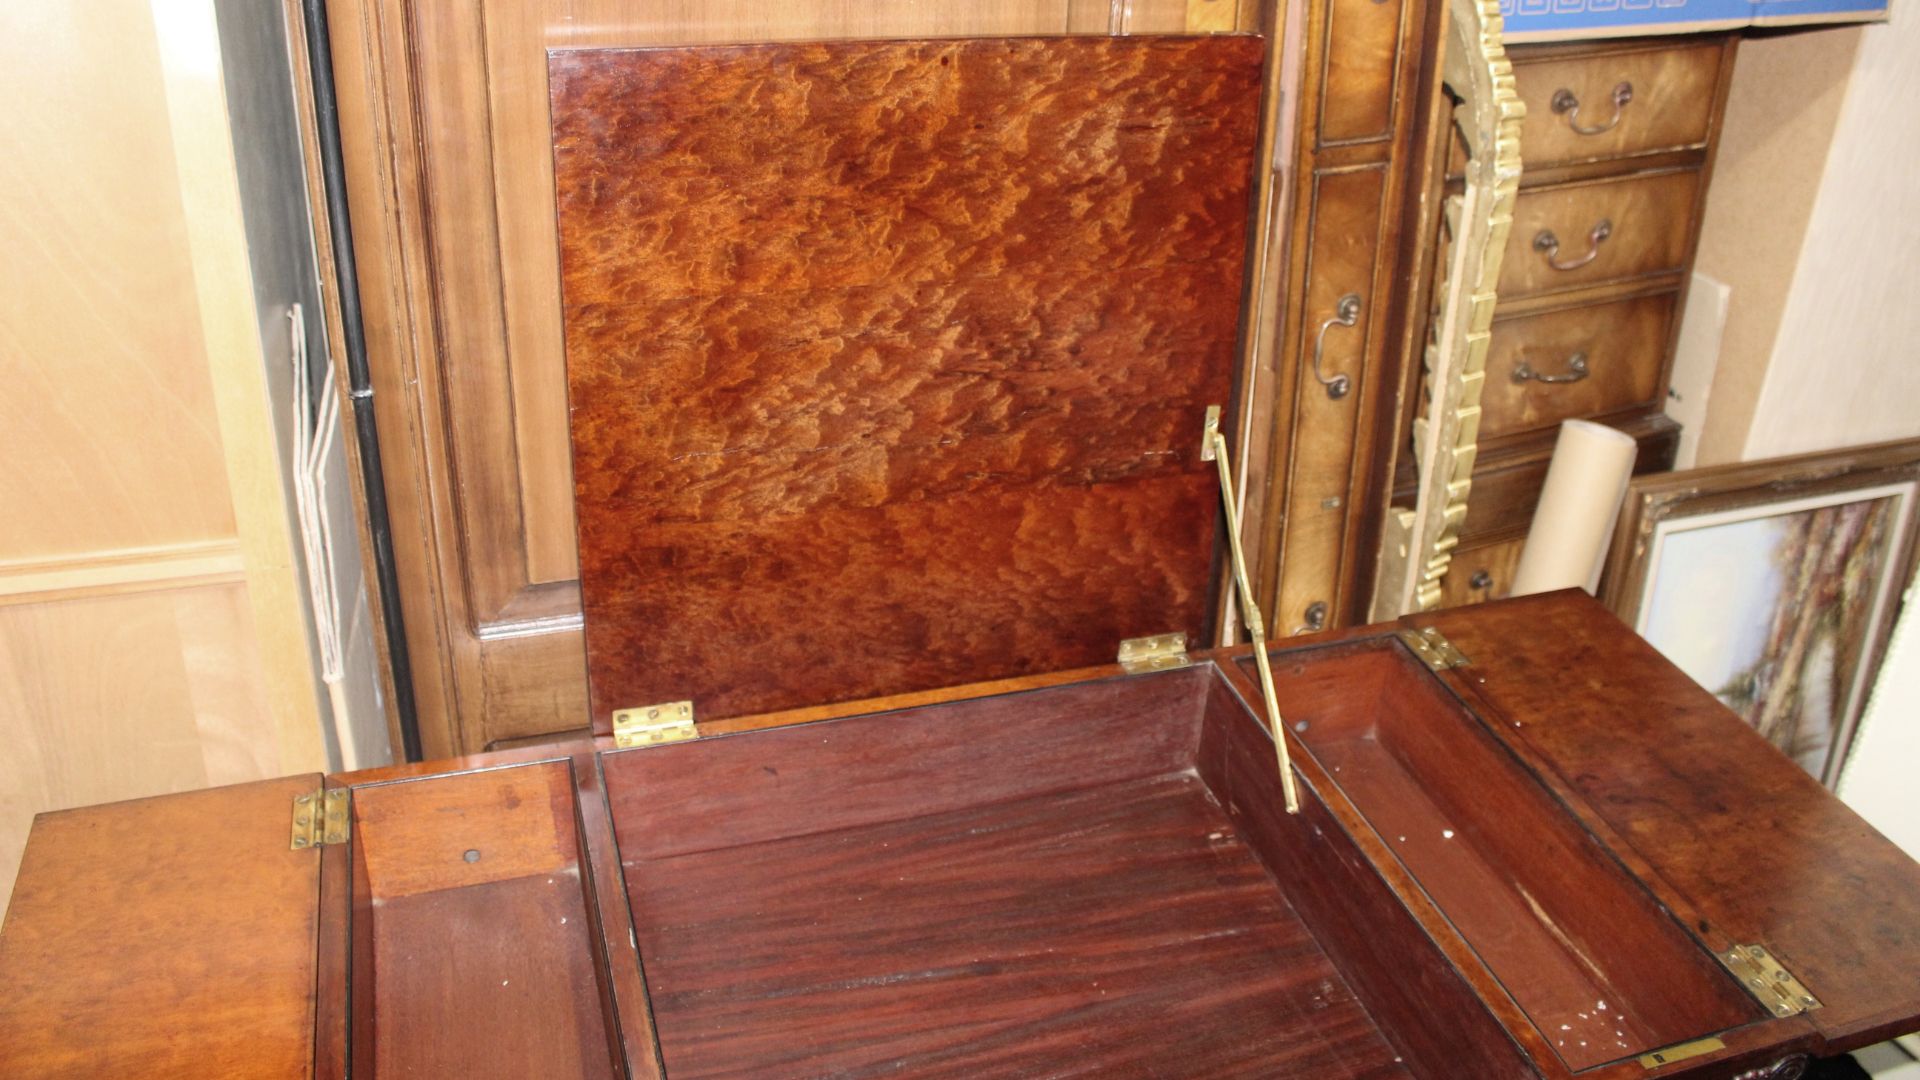 Fine Late 18th c. Mahogany Desk with Carved Feet - Image 4 of 8